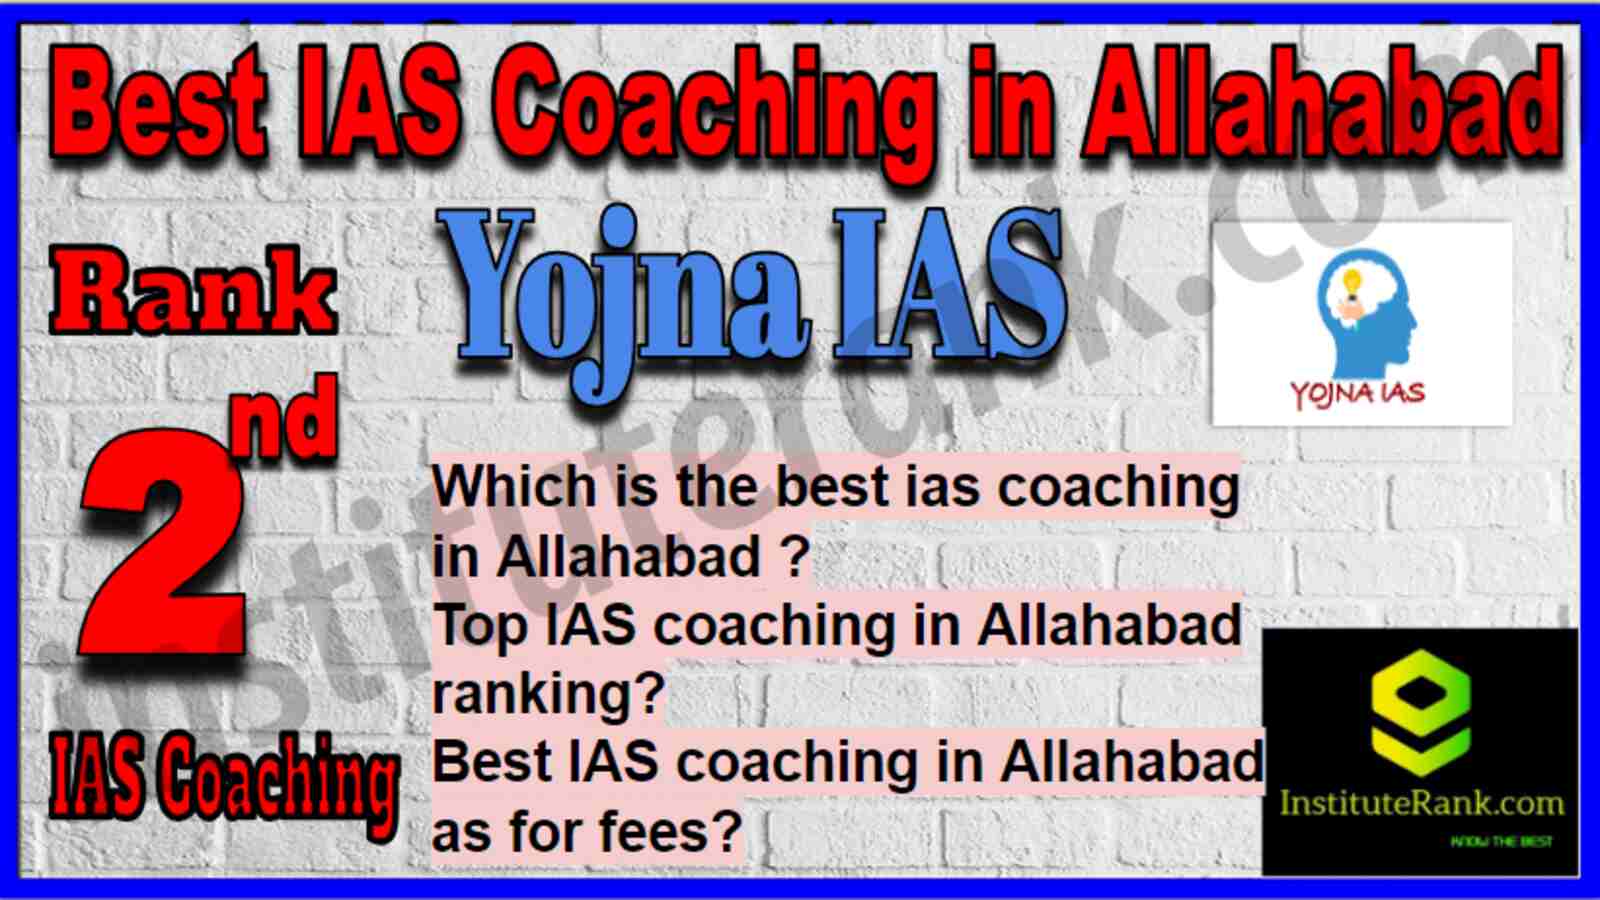 Rank 2 Best IAS Coaching in Allahabad